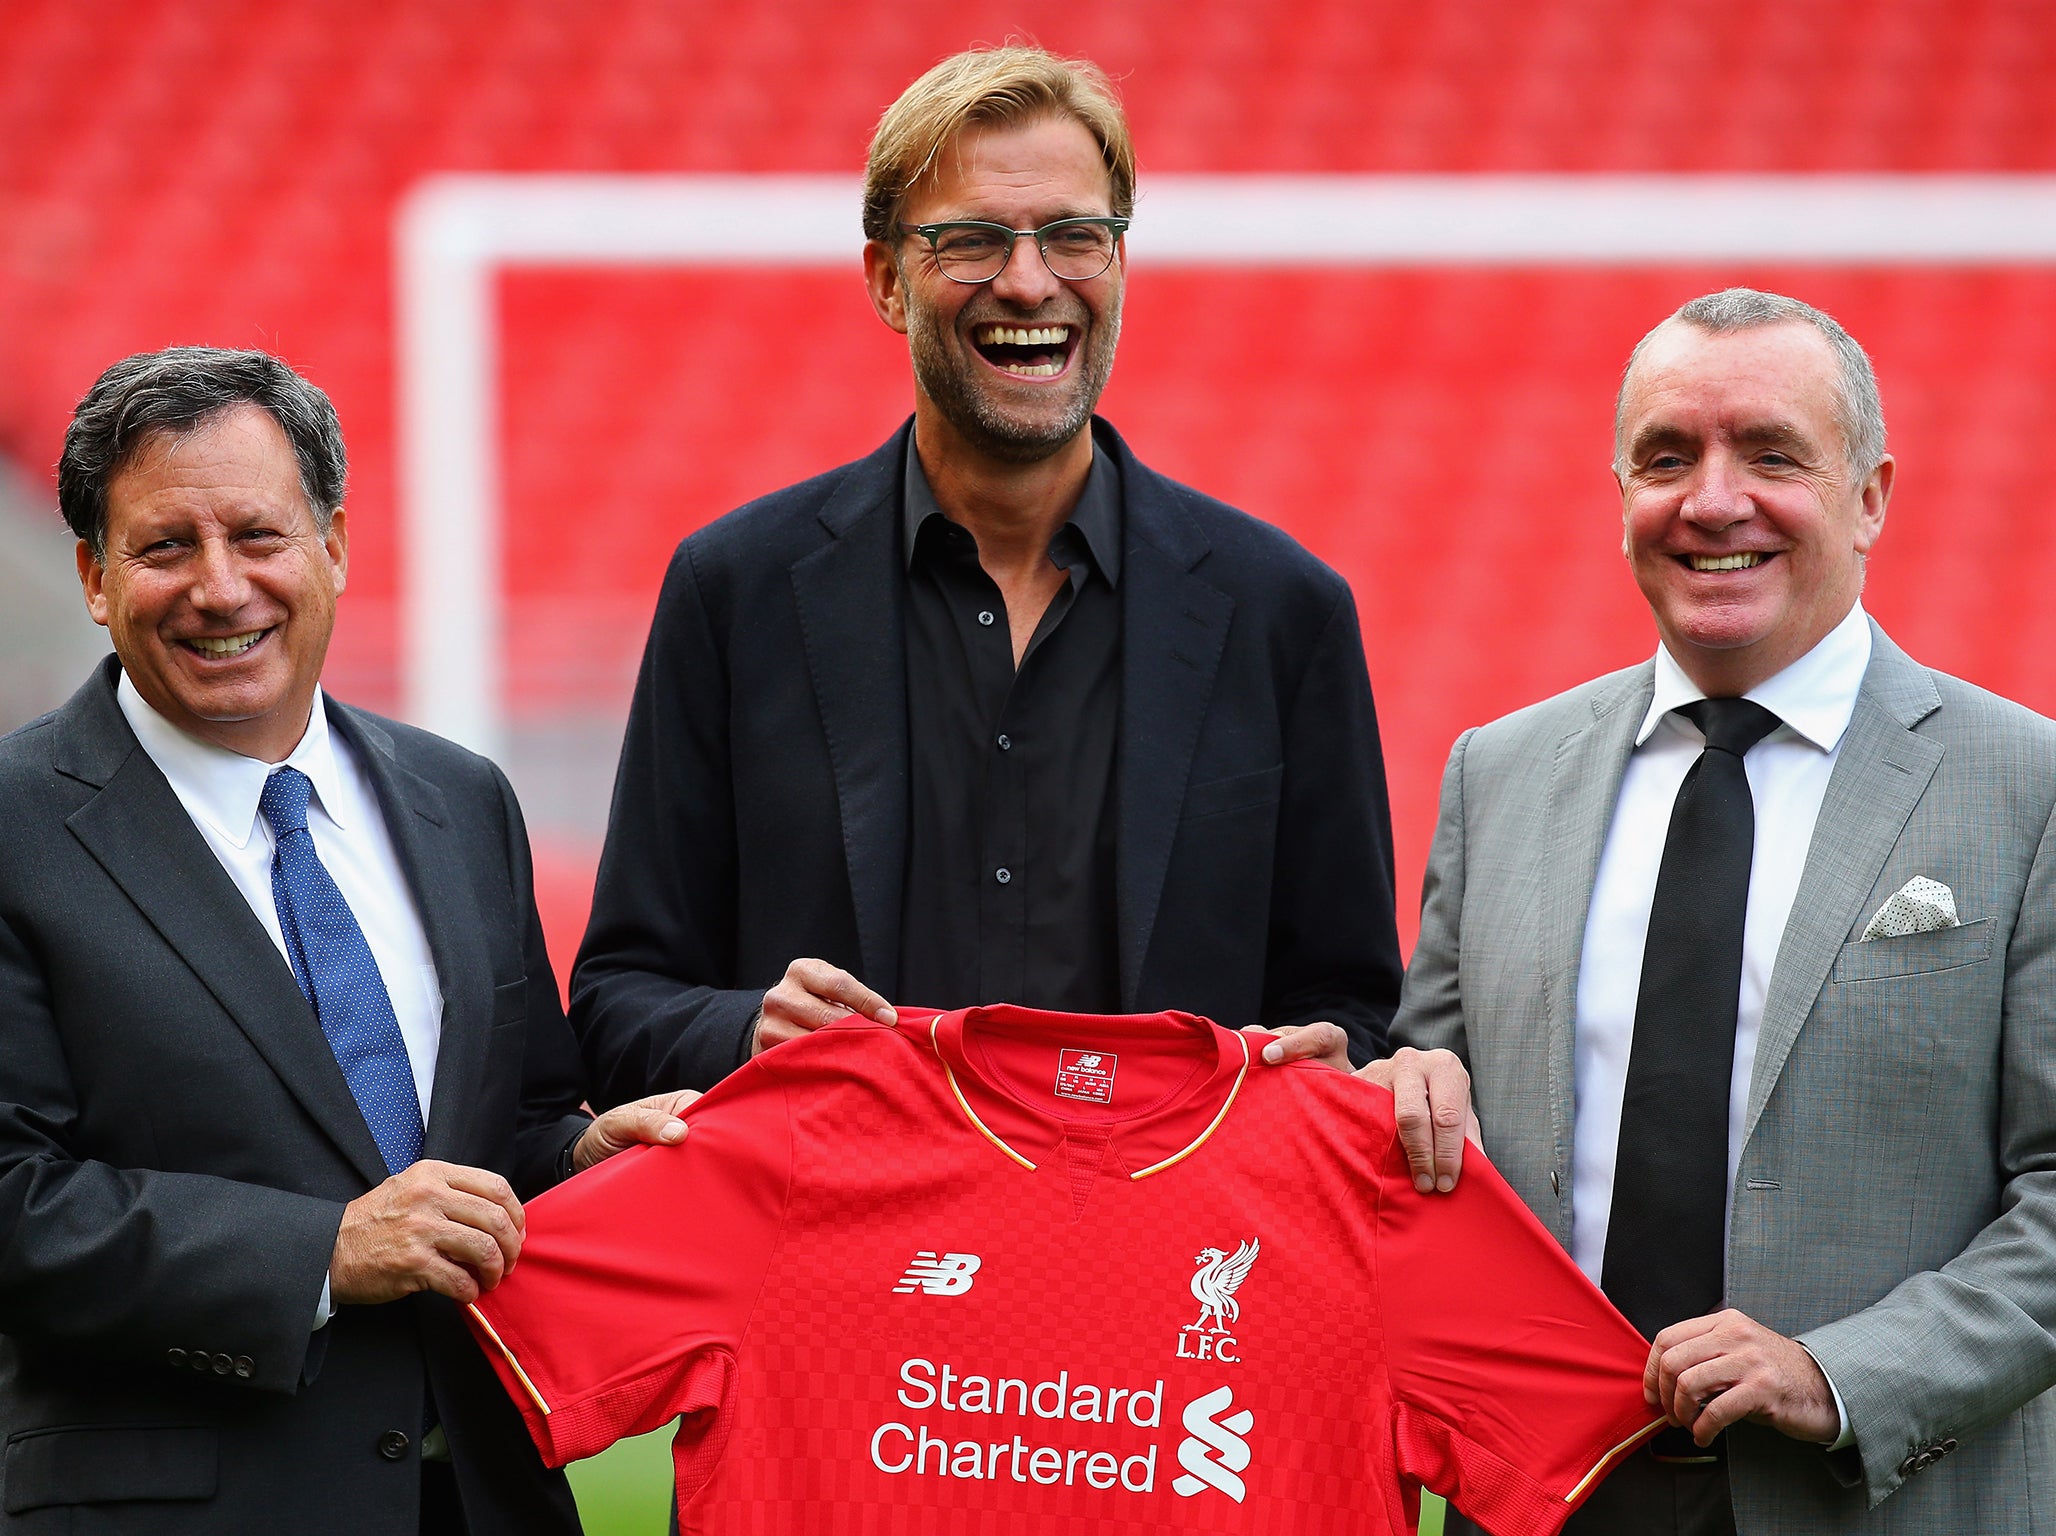 Everton could learn a thing or two from Klopp's appointment